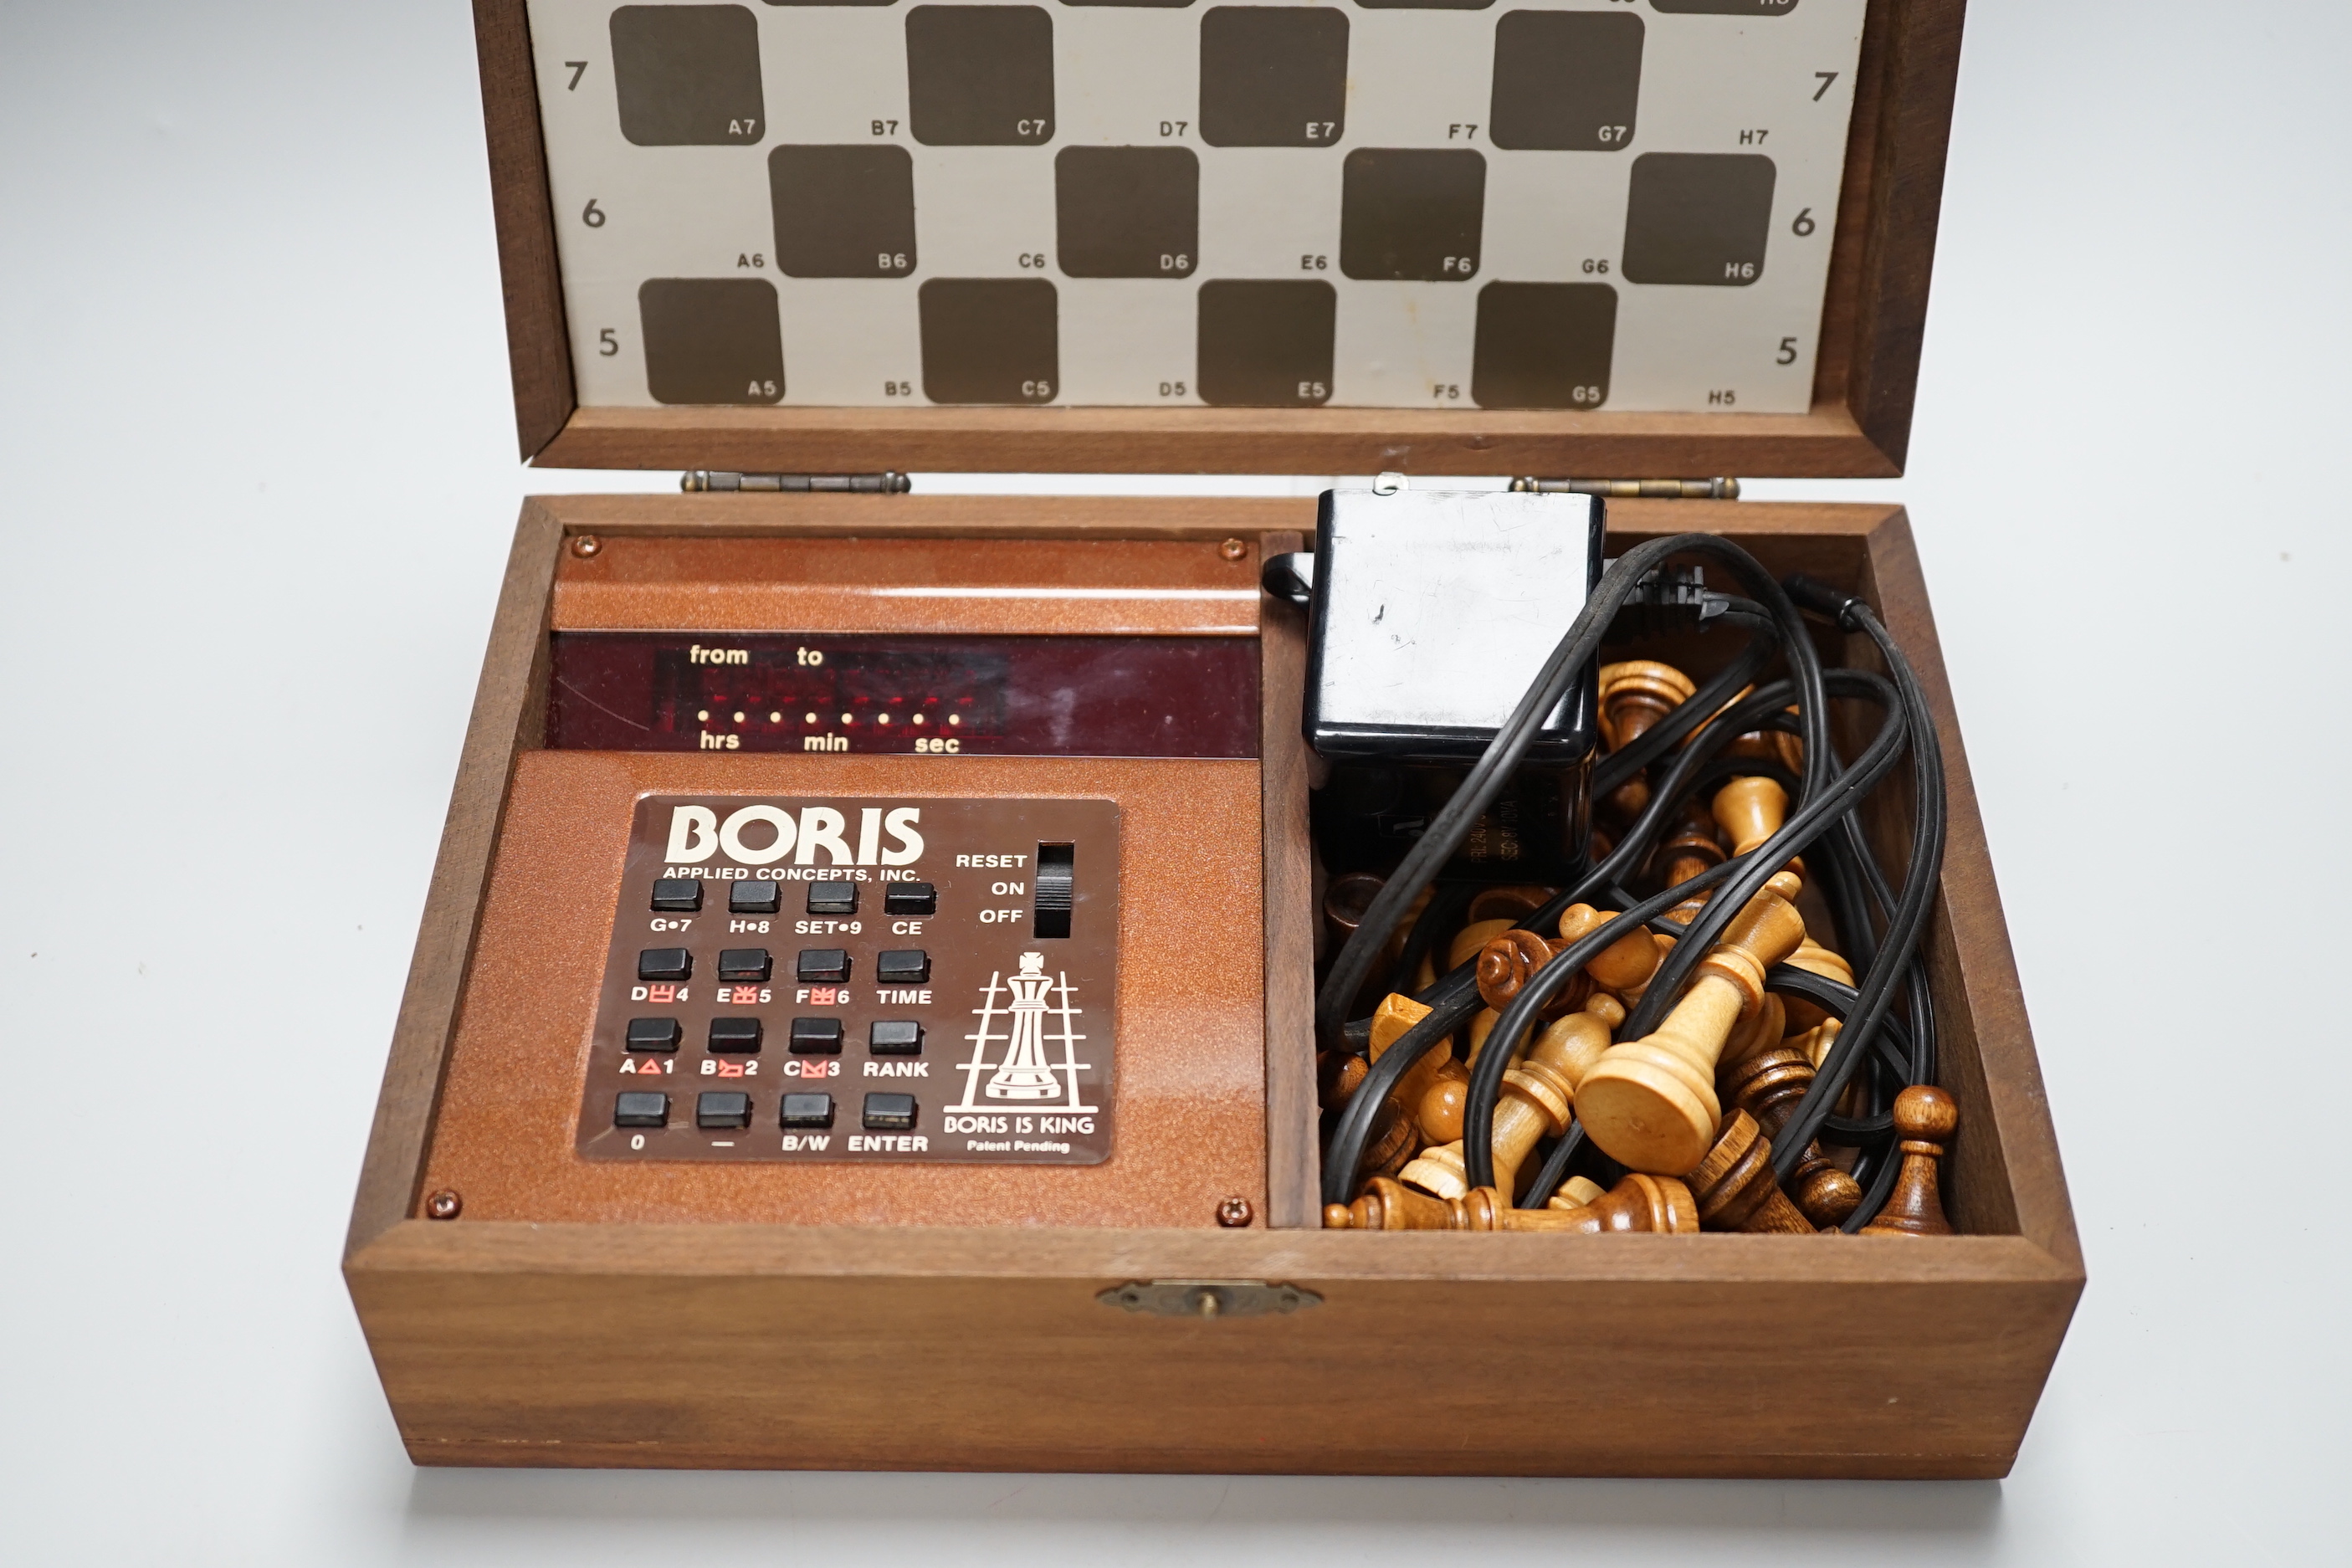 A 1970's Boris electronic chess set by Applied Concepts Inc., in a walnut case, 25.5cm x 17cm - Image 3 of 3